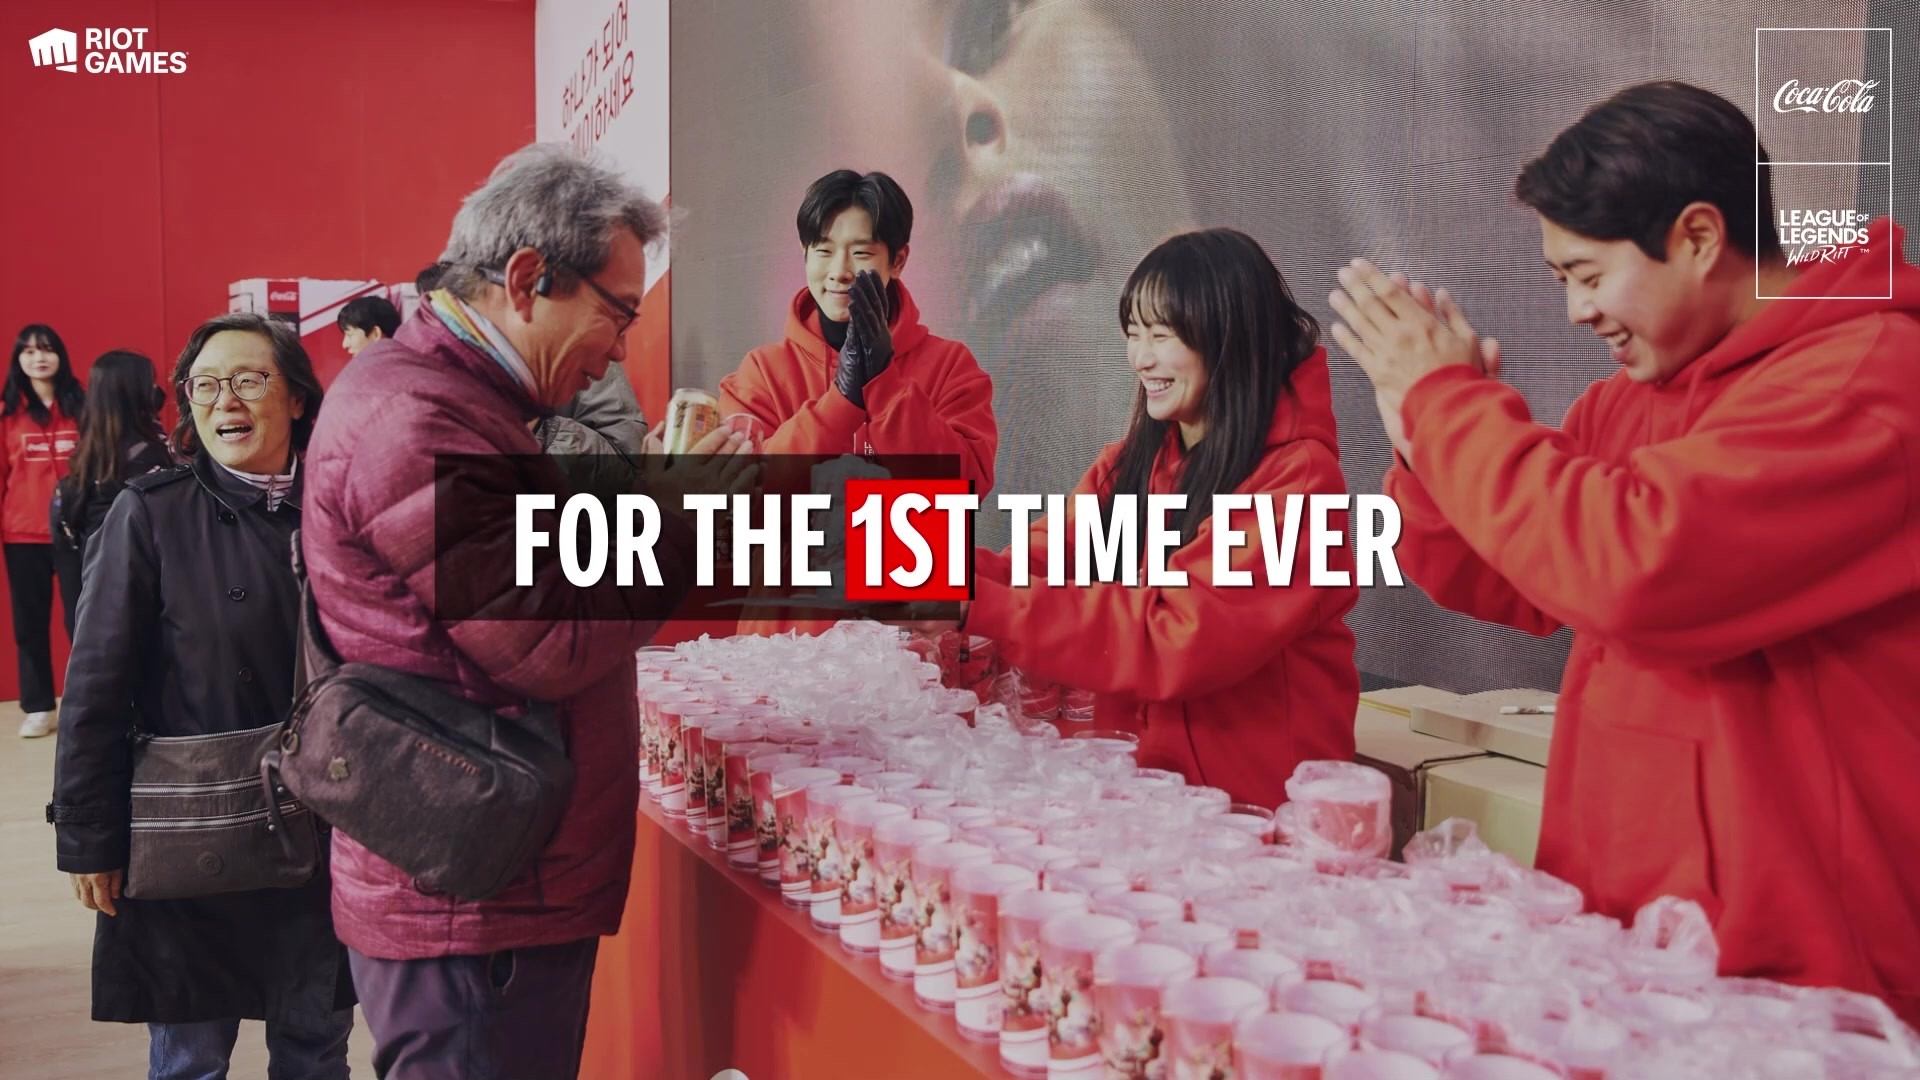 Uniting Gamers Globally with Coca-Cola “Play As One” 